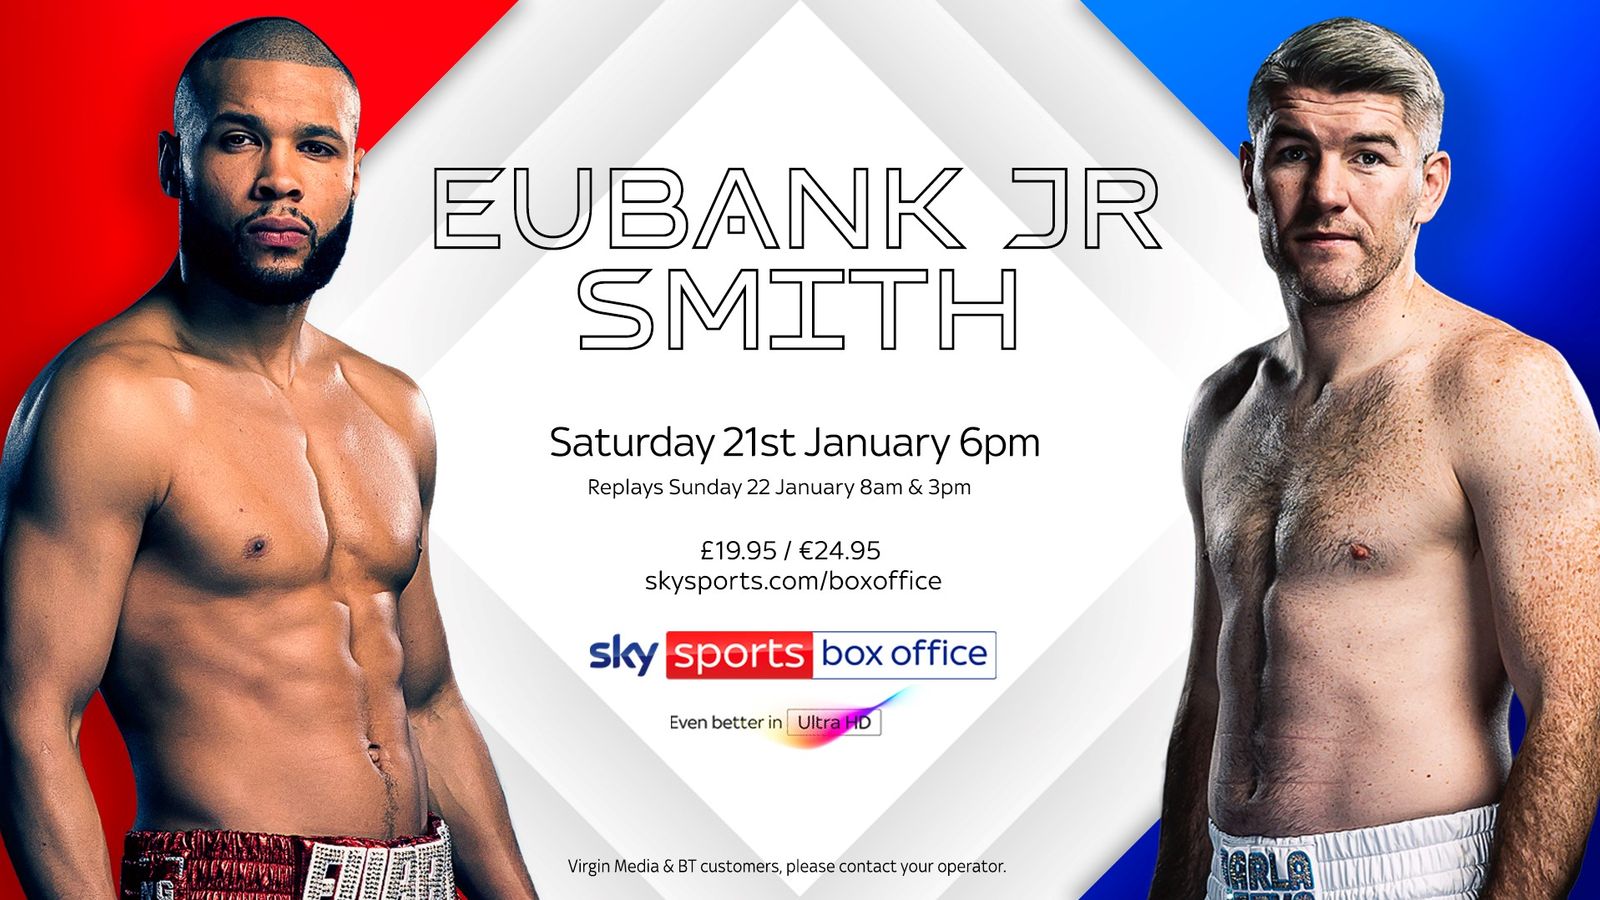 Eubank Jr vs Smith Timing, pricing, booking details for British middleweight battle in Manchester on January 21 Boxing News Sky Sports